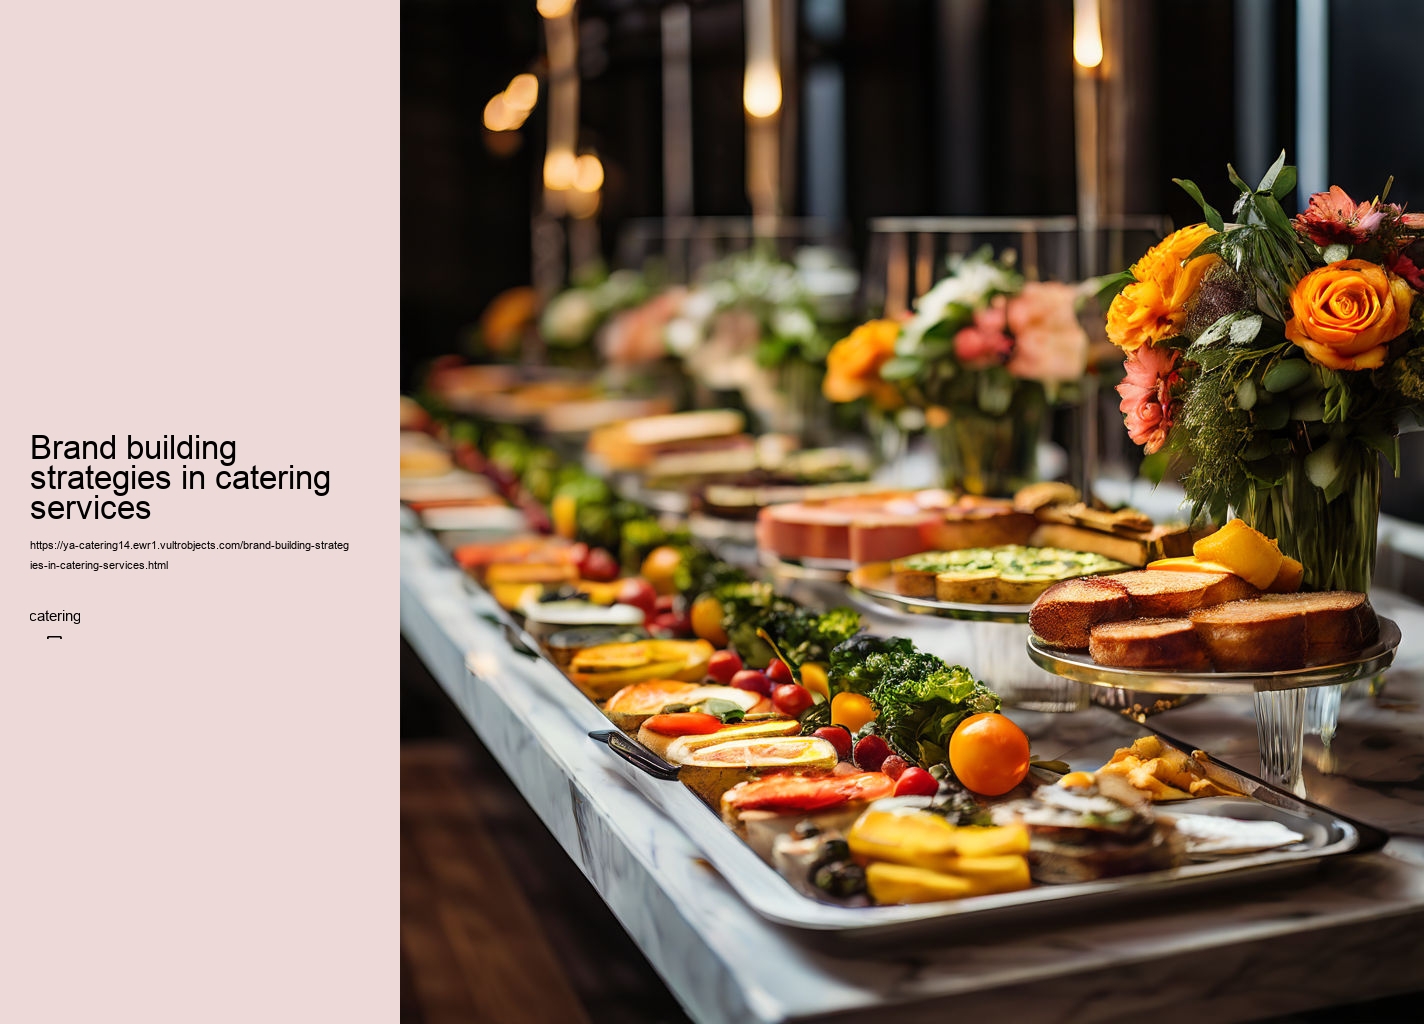 Brand building strategies in catering services